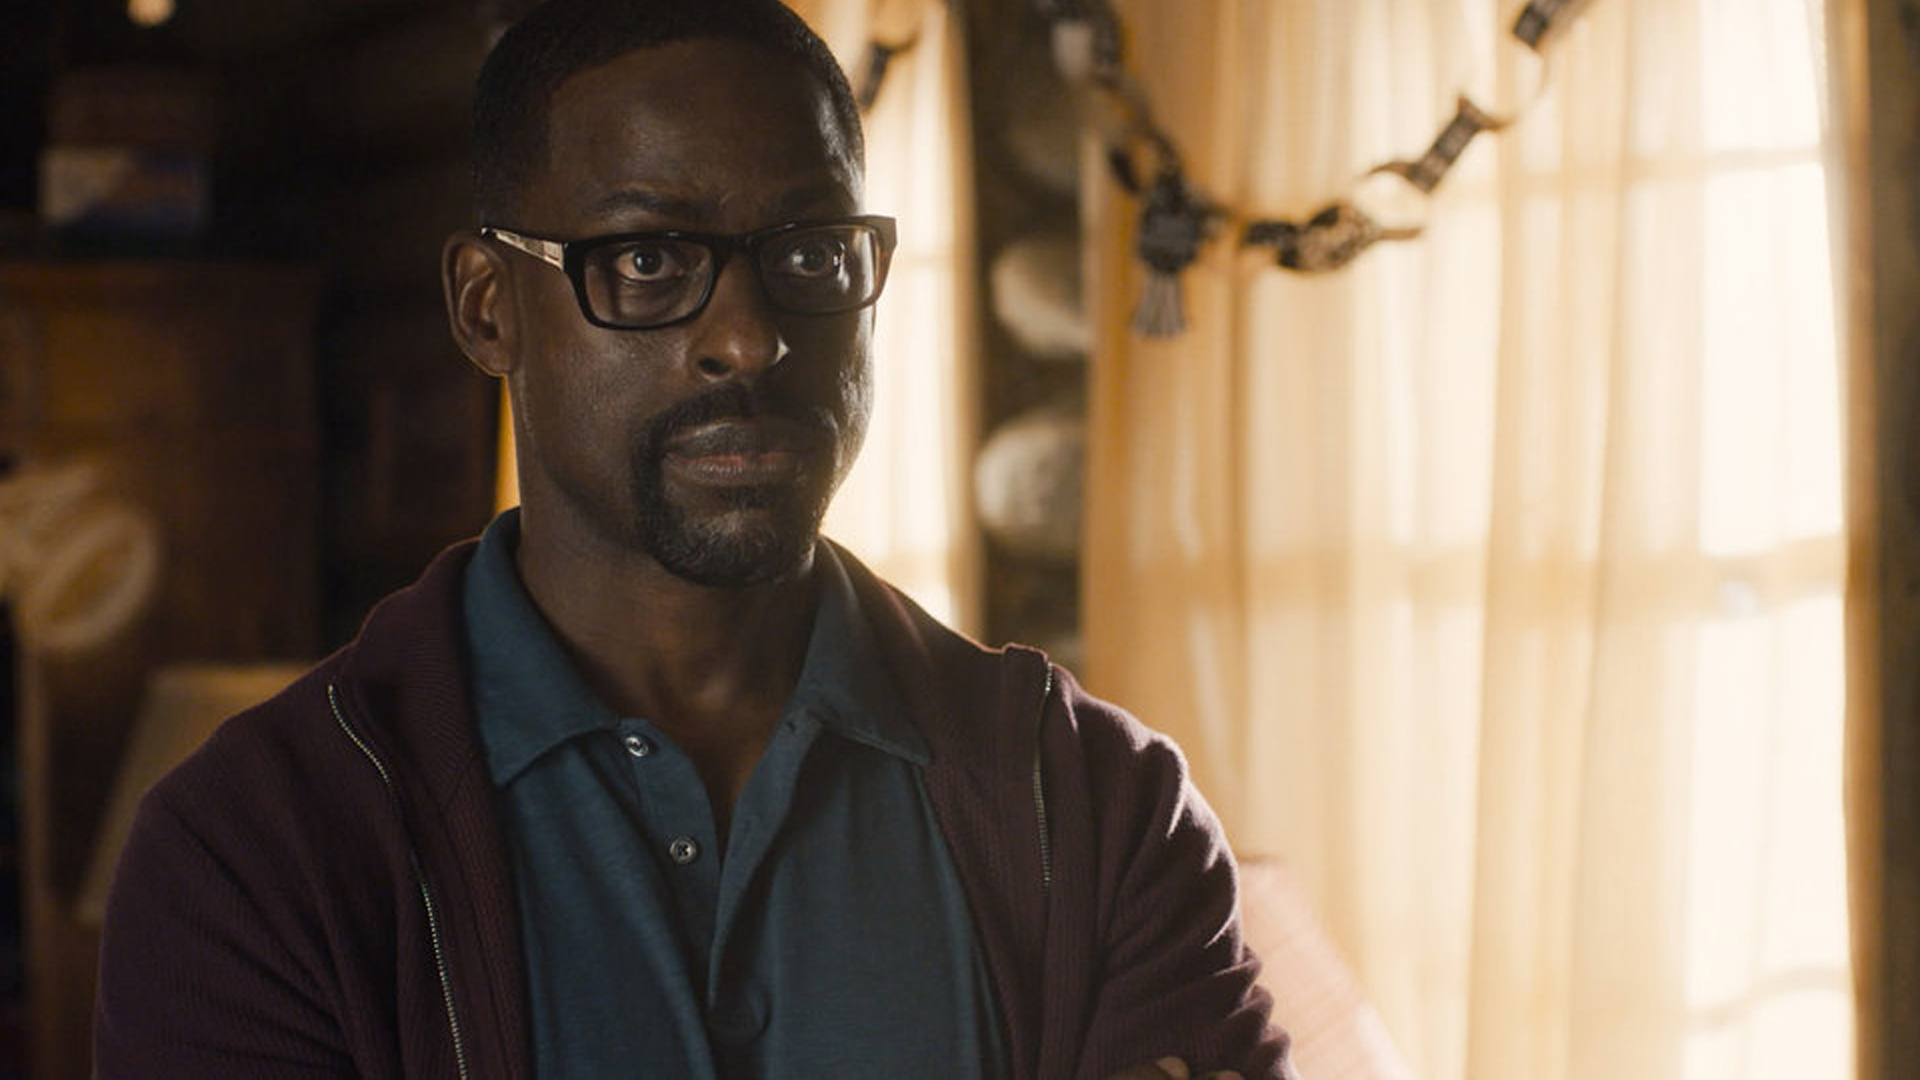 Sterling K. Brown as Randall on 'This Is Us' Season 5 Episode 1 Premiere